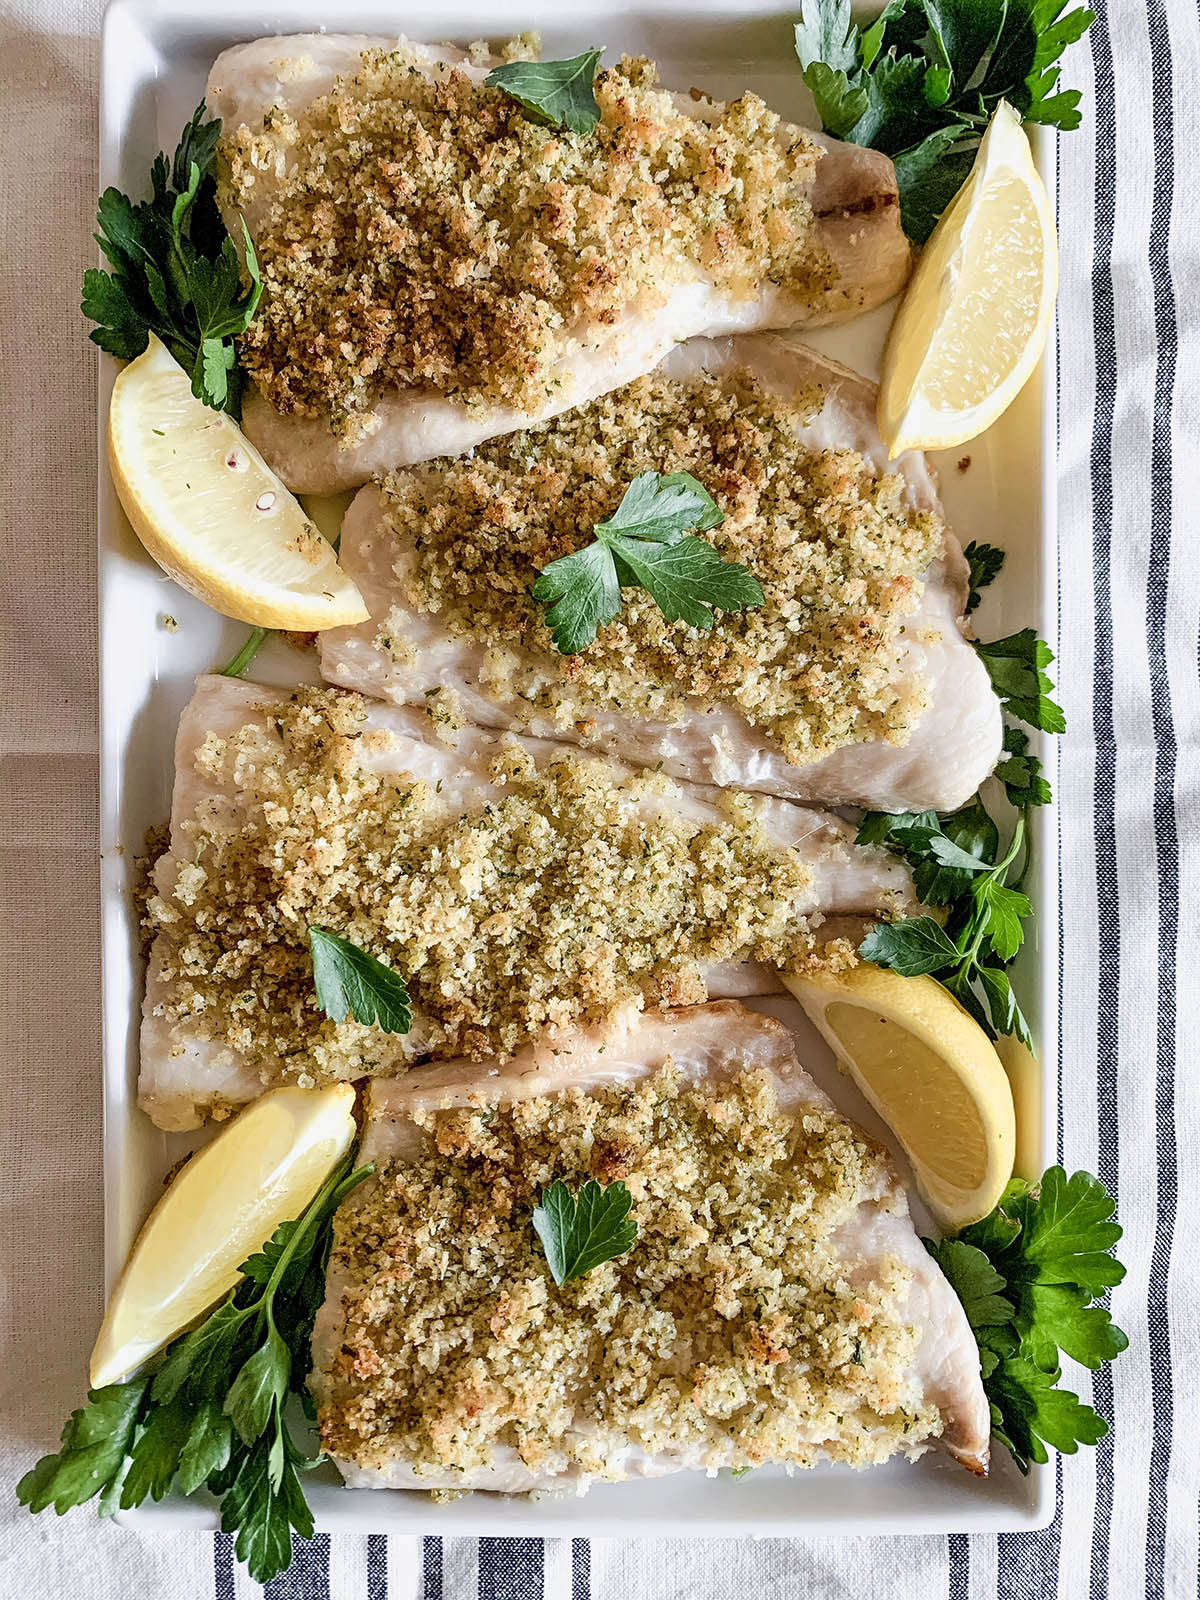 A platter of baked Panko-crusted whitefish on a striped tablecloth.